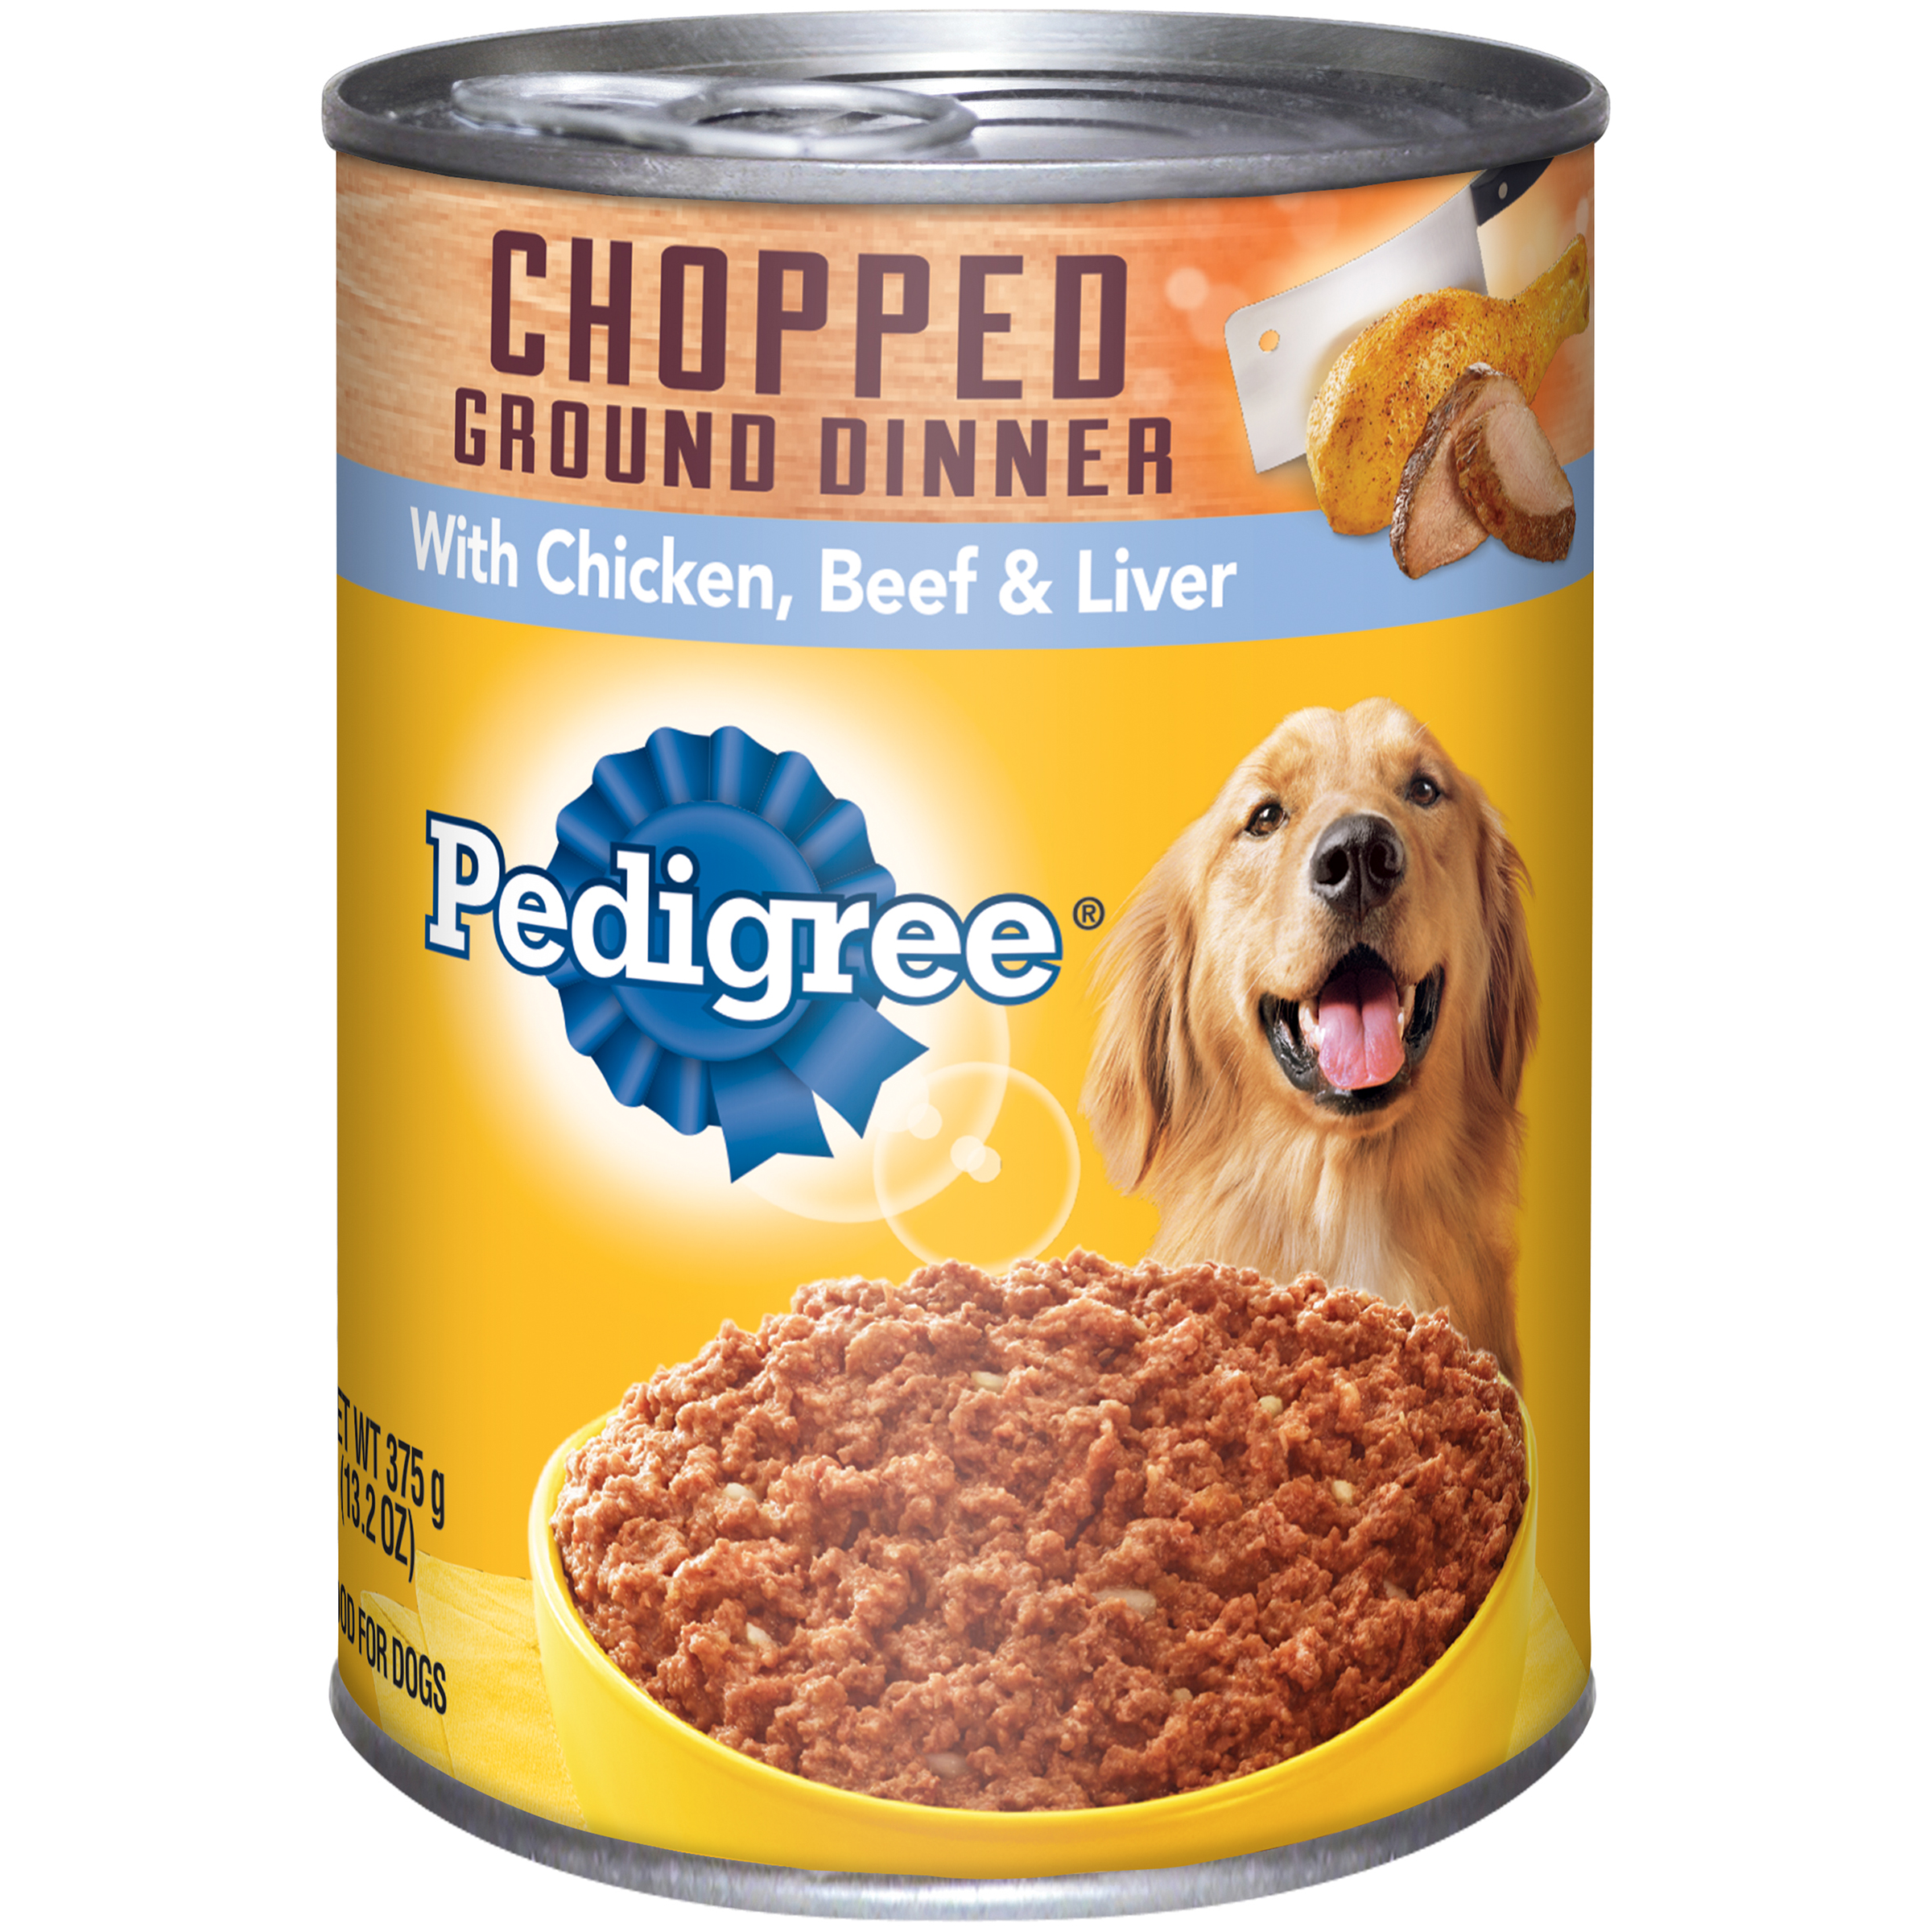 Pedigree Food for Adult Dogs, with Real Chicken and Beef, 13.2 oz (375 g)